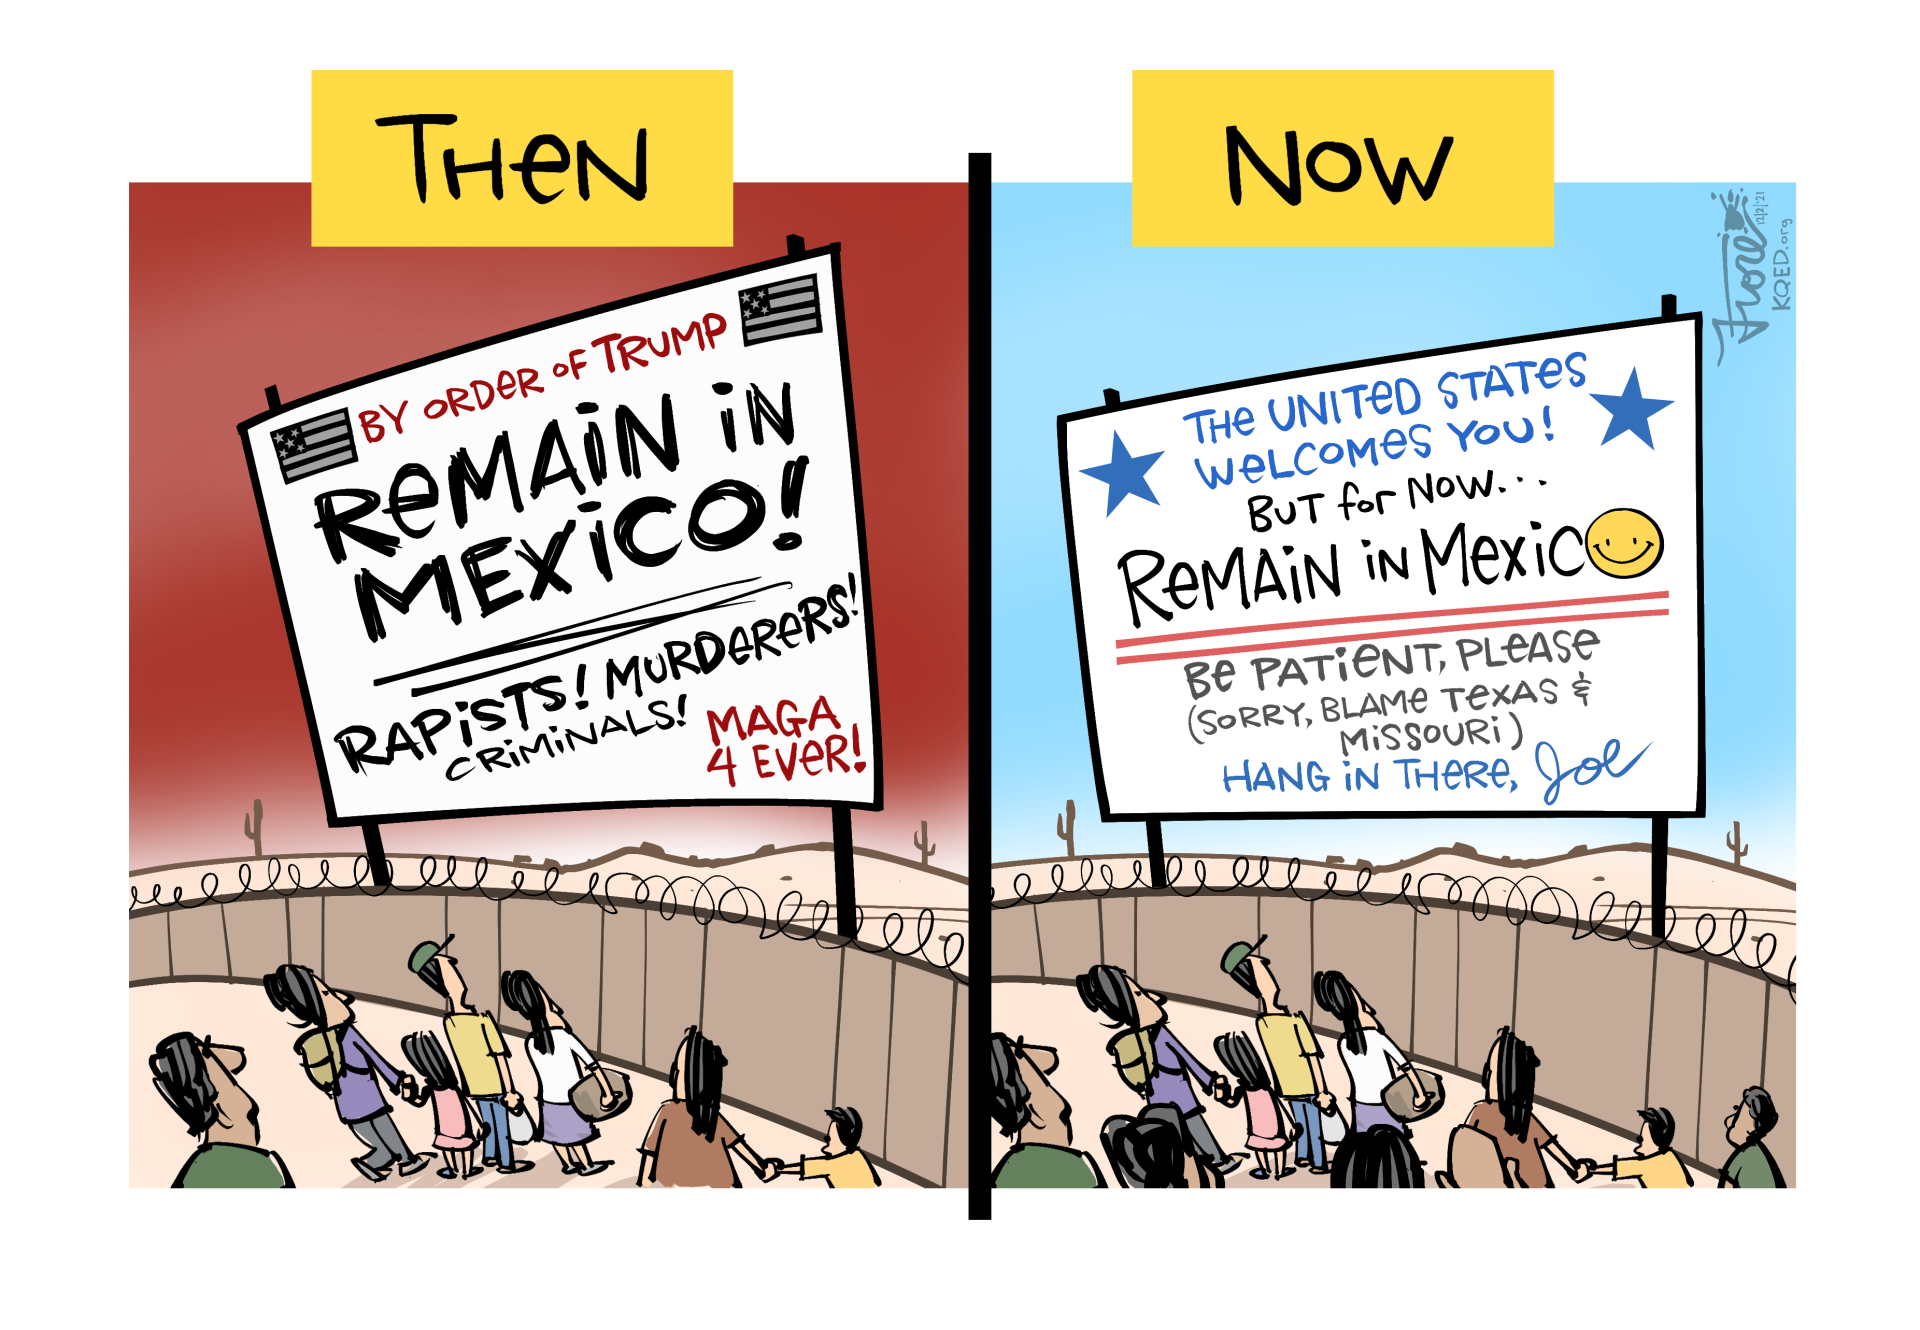 Cartoon: shows "then" and "now" images of a "remain in Mexico" immigration sign. The Trump-era sign says things like "rapists" and "murderers" while the current Biden sign apologizes yet still calls on asylum-seekers to remain in Mexico.